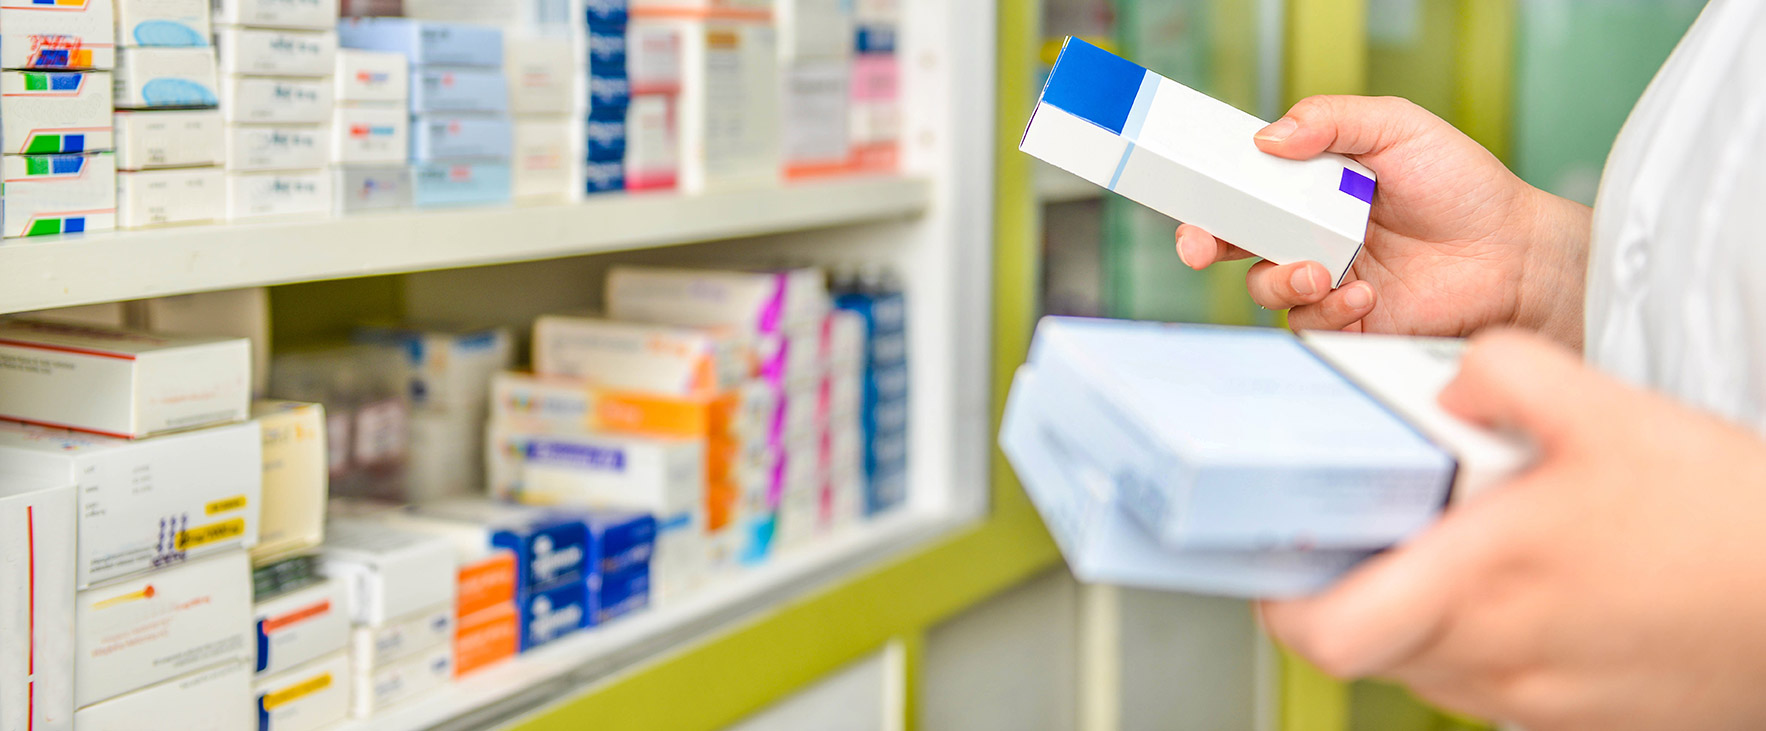 Community pharmacists in England to offer prescription medicines for a number of health conditions – CPNI Statement